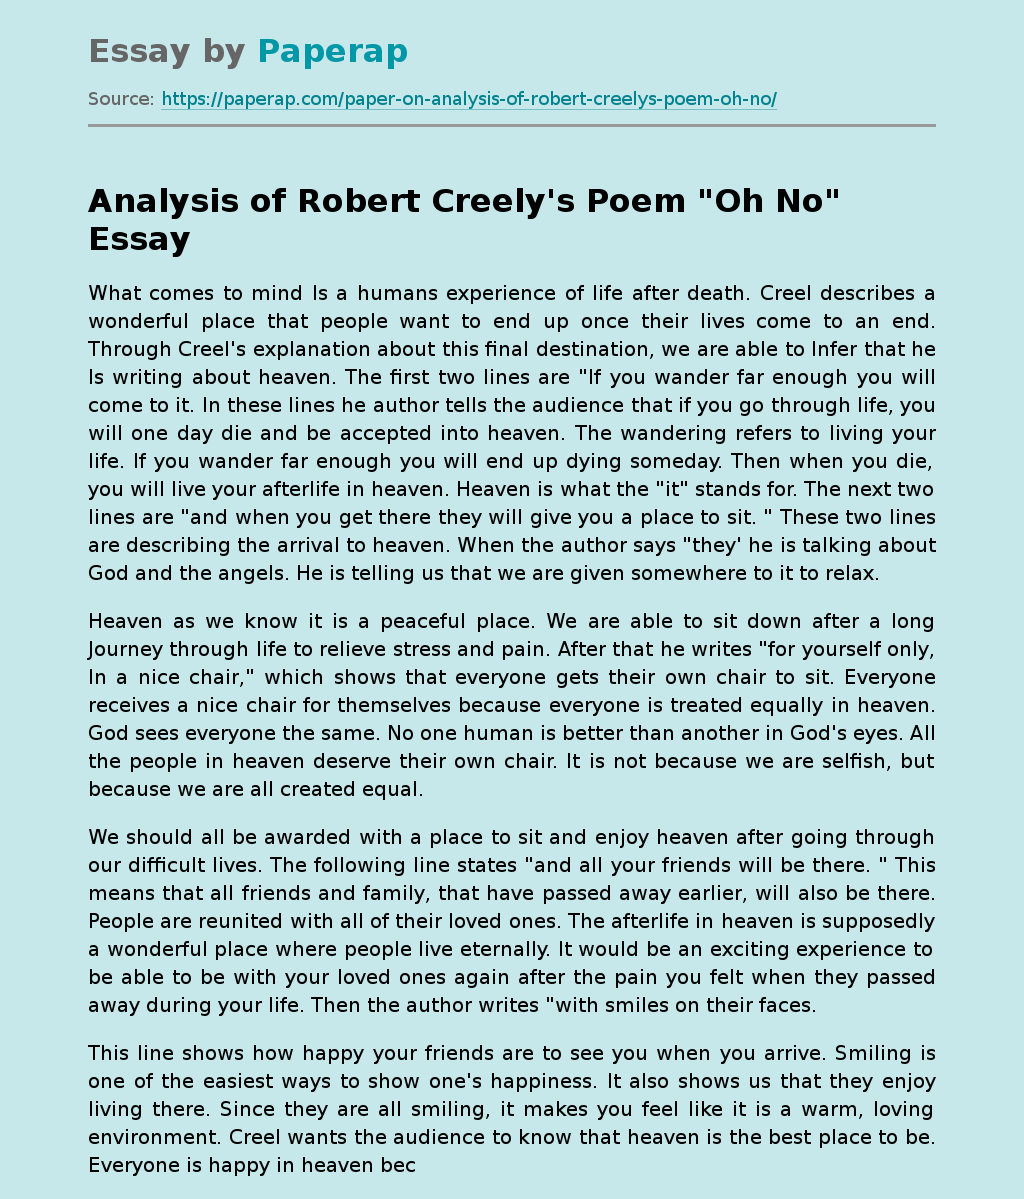 Analysis of Robert Creely's Poem "Oh No"